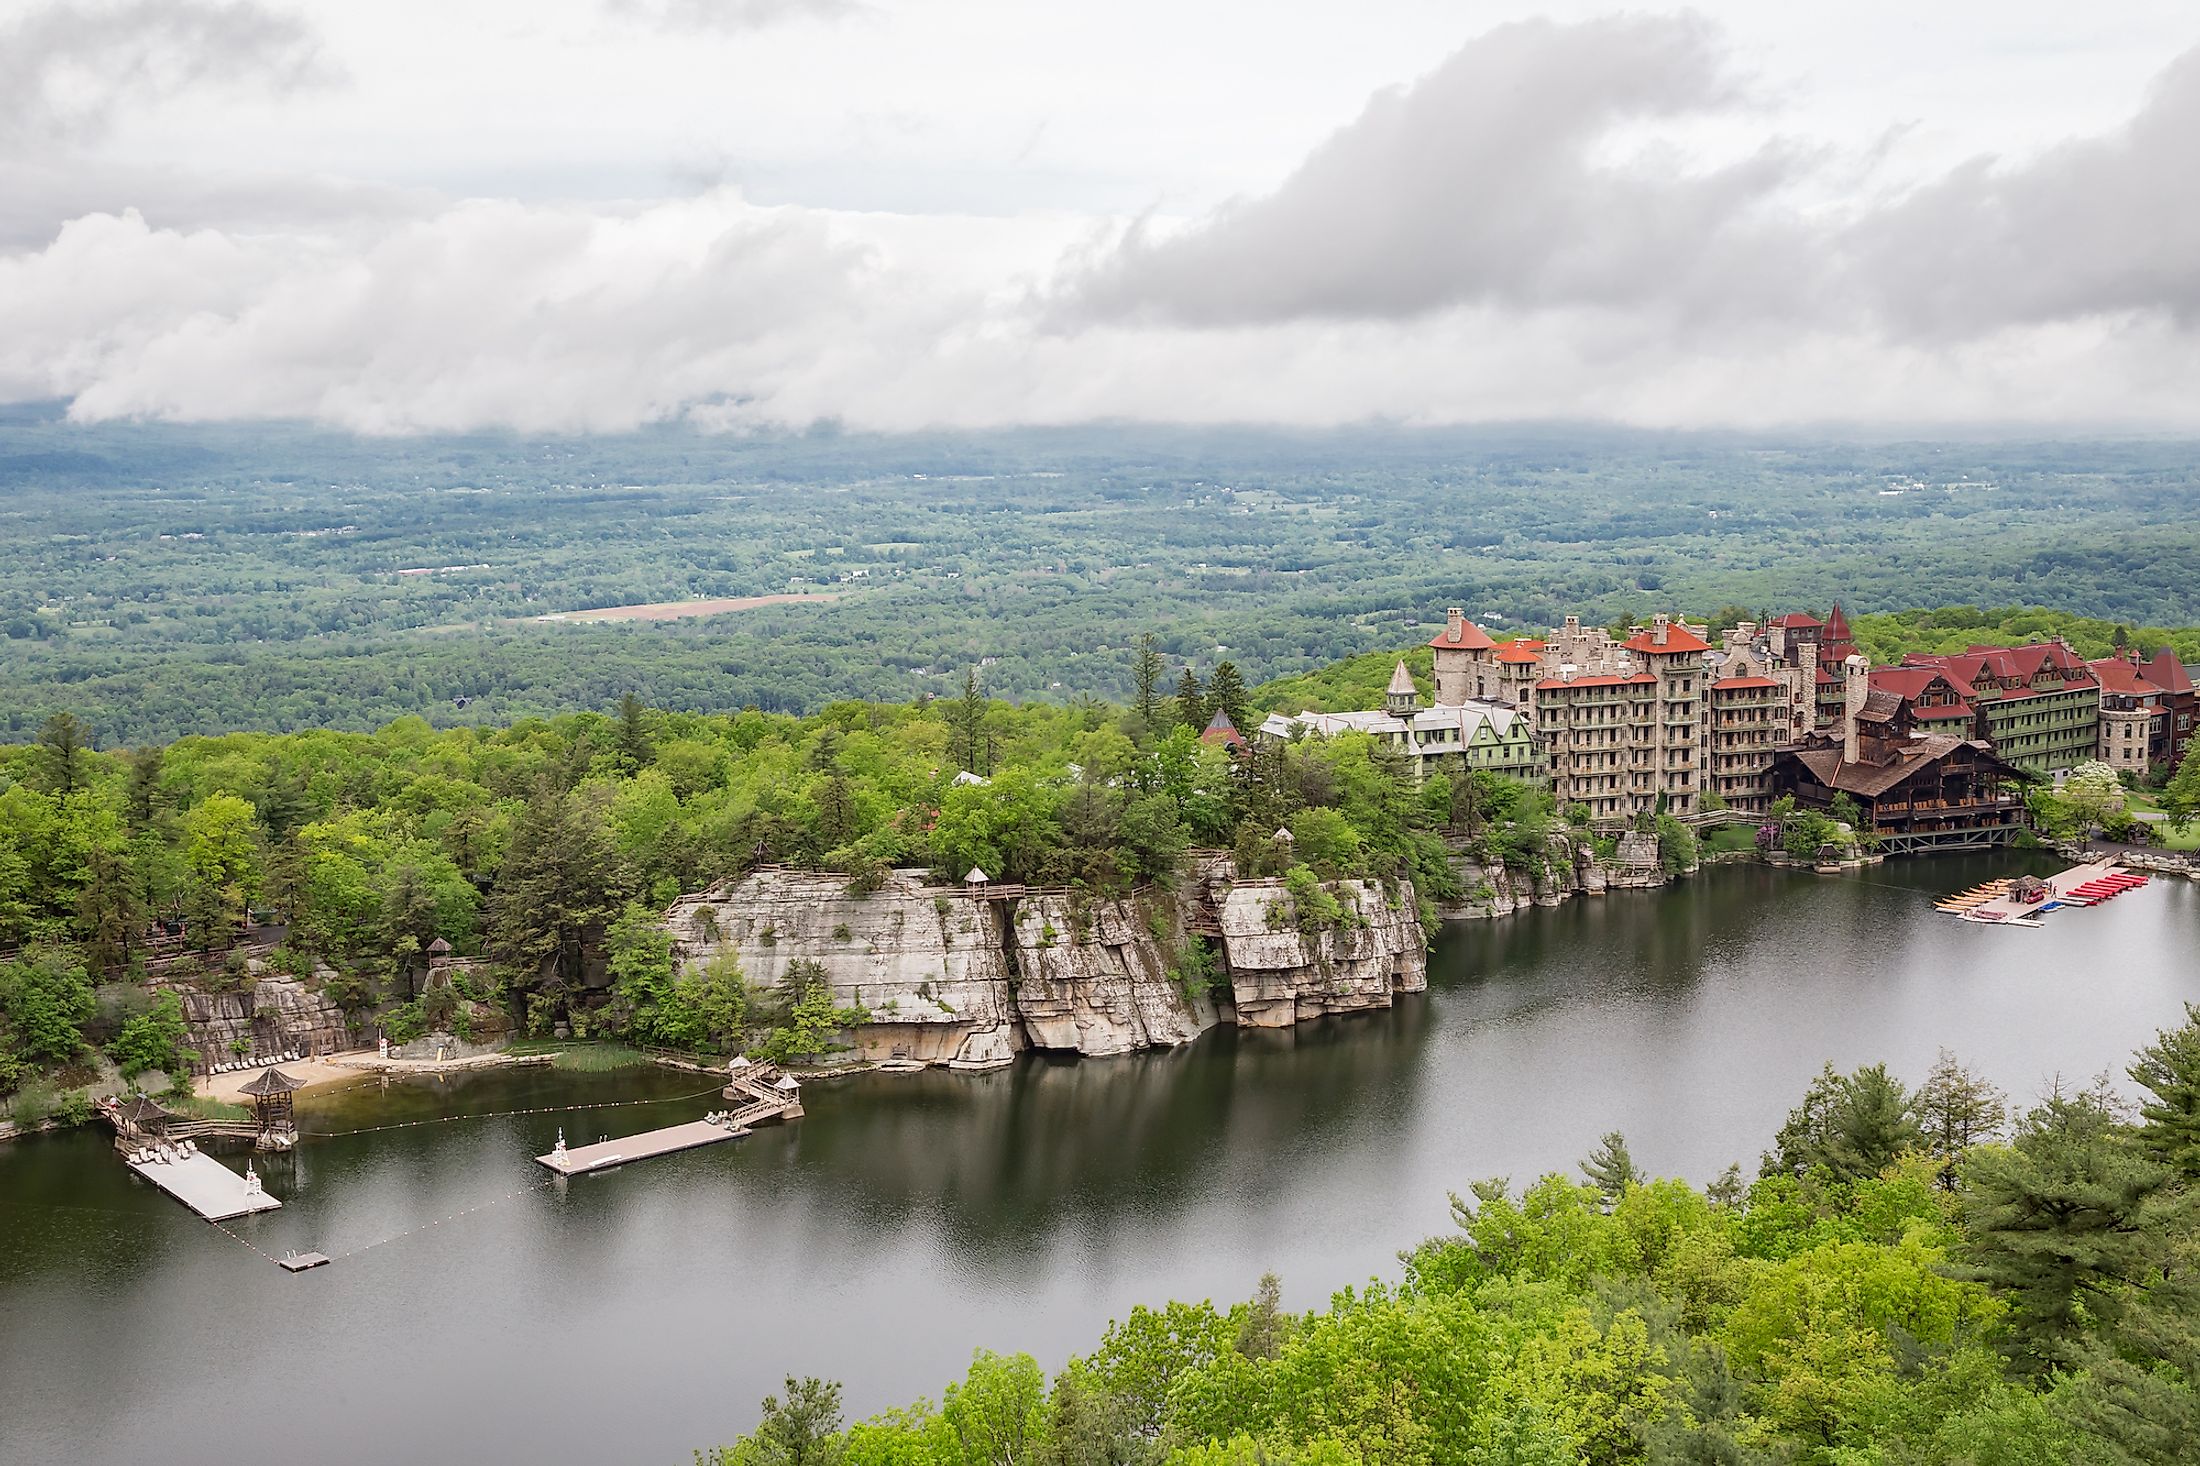 Mohonk Mountain House in New Paltz, New York.